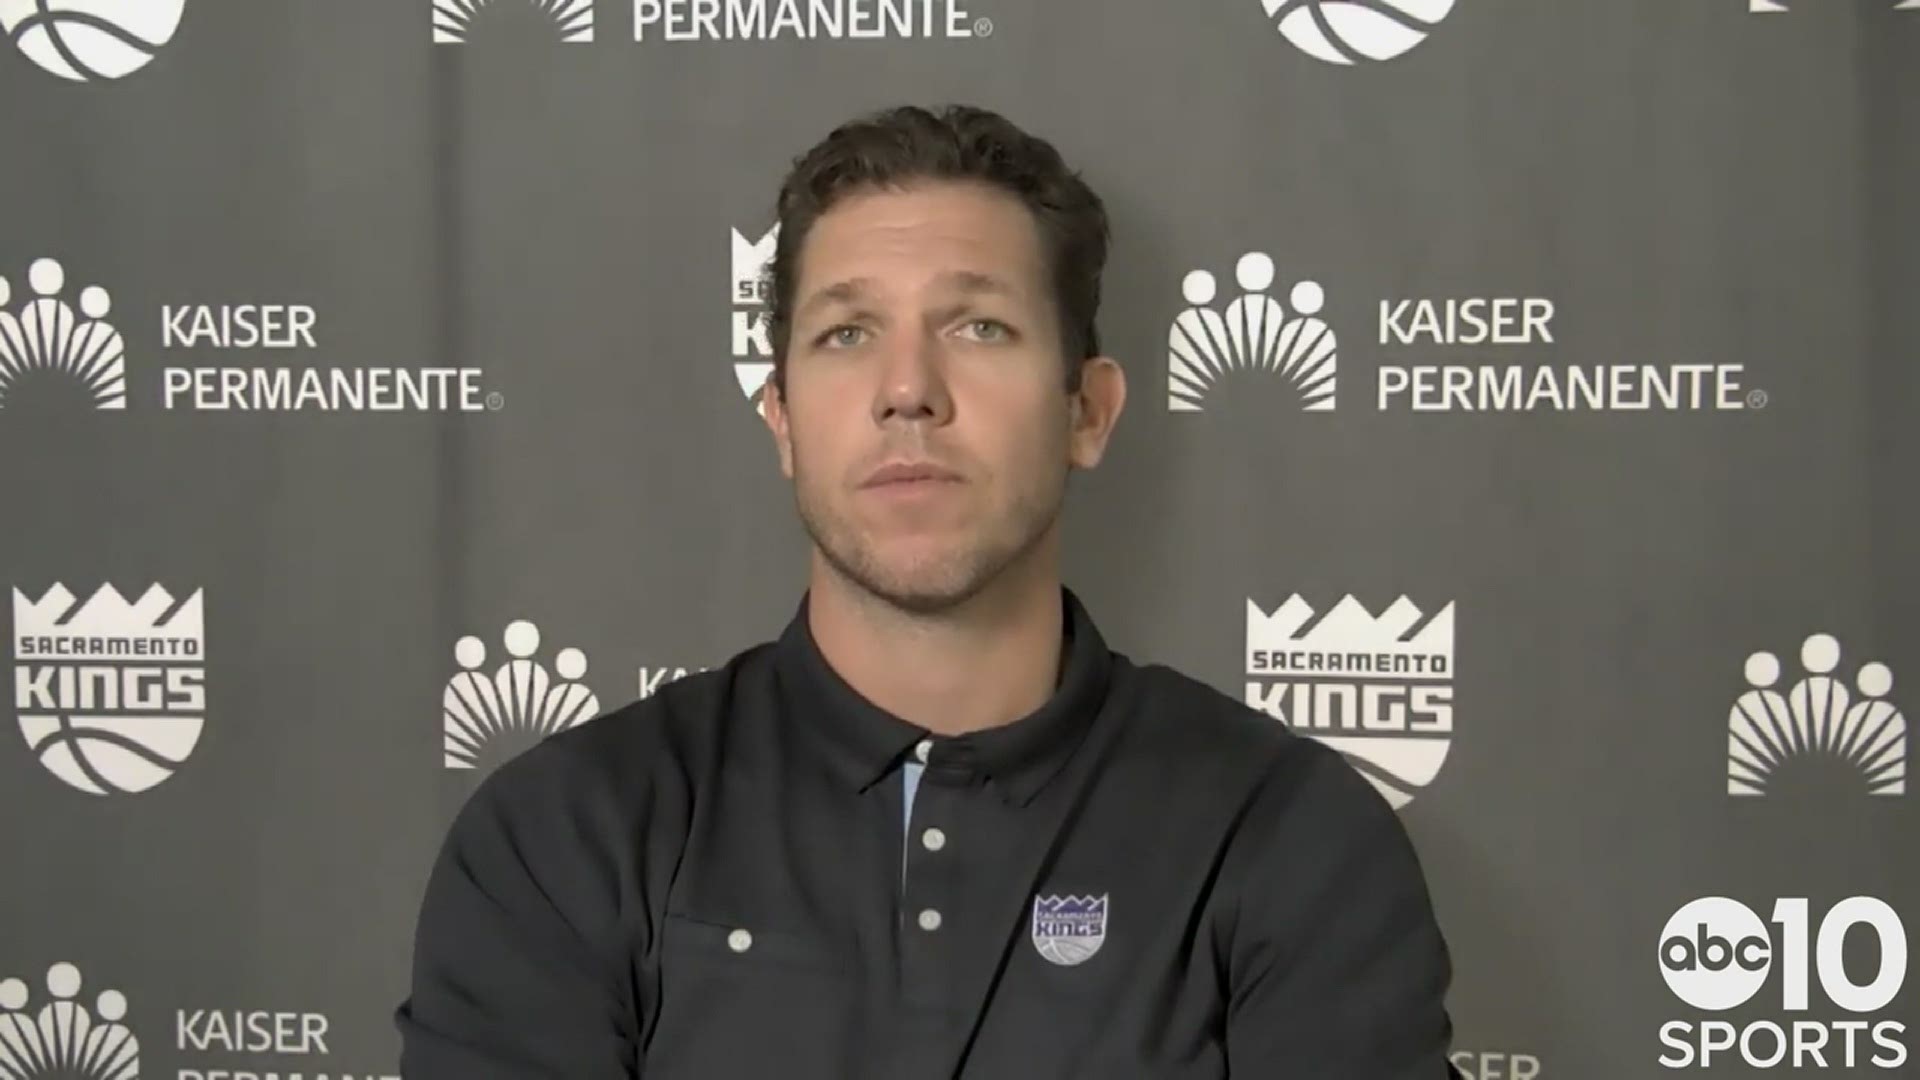 Kings coach Luke Walton analyzes Friday's 126-124 victory over the Toronto Raptors in Tampa and earning a third straight victory to improve to 8-10 on the season.